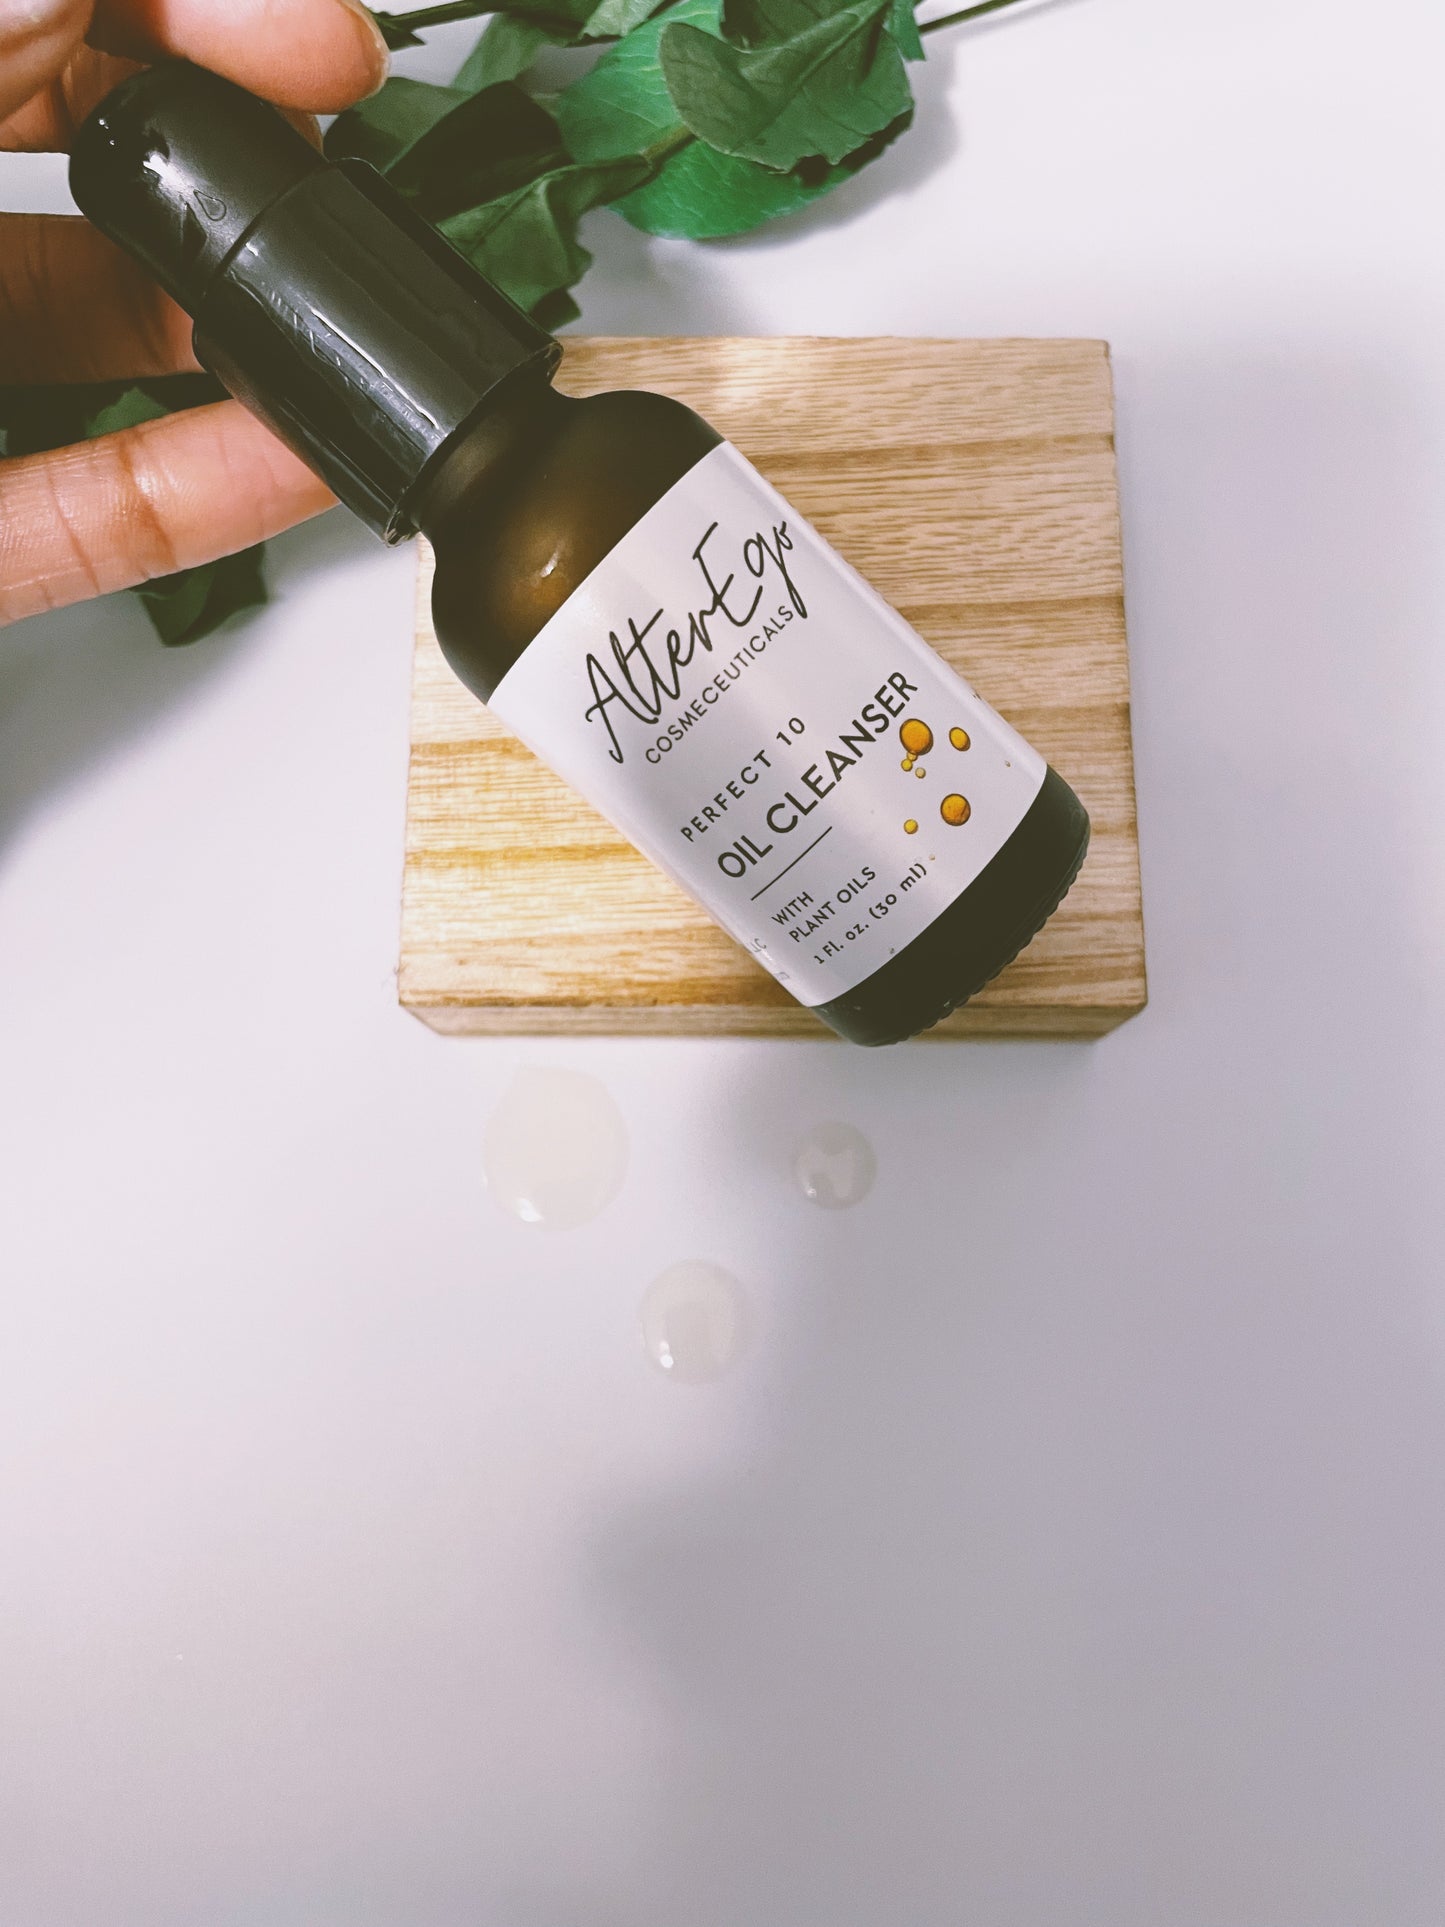 Botanical Oil Cleanser with Plant Oils